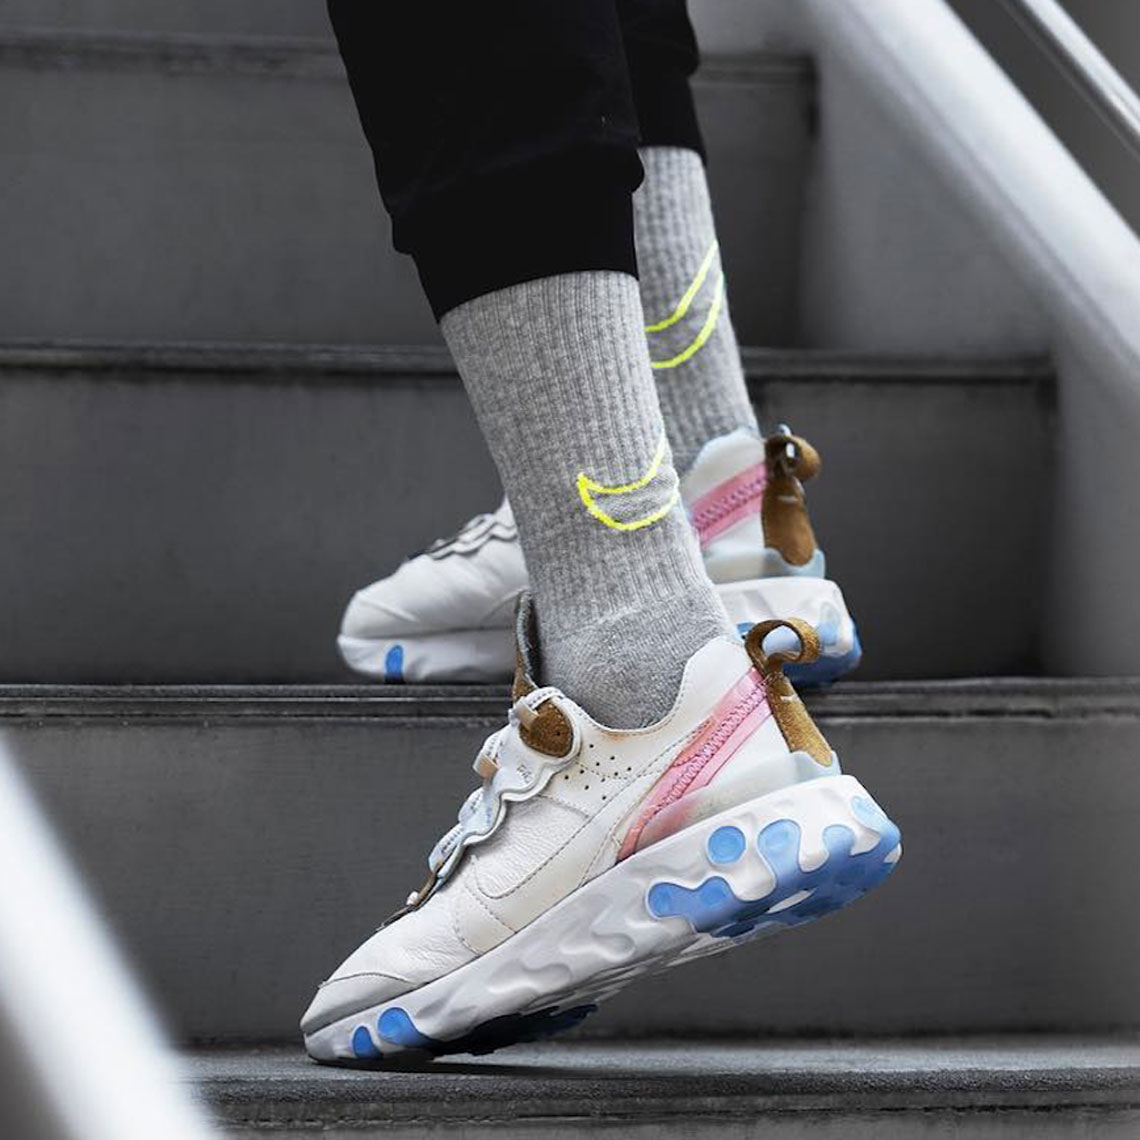 The Shoe Surgeon Nike React Element 87 Leather | SneakerNews.com